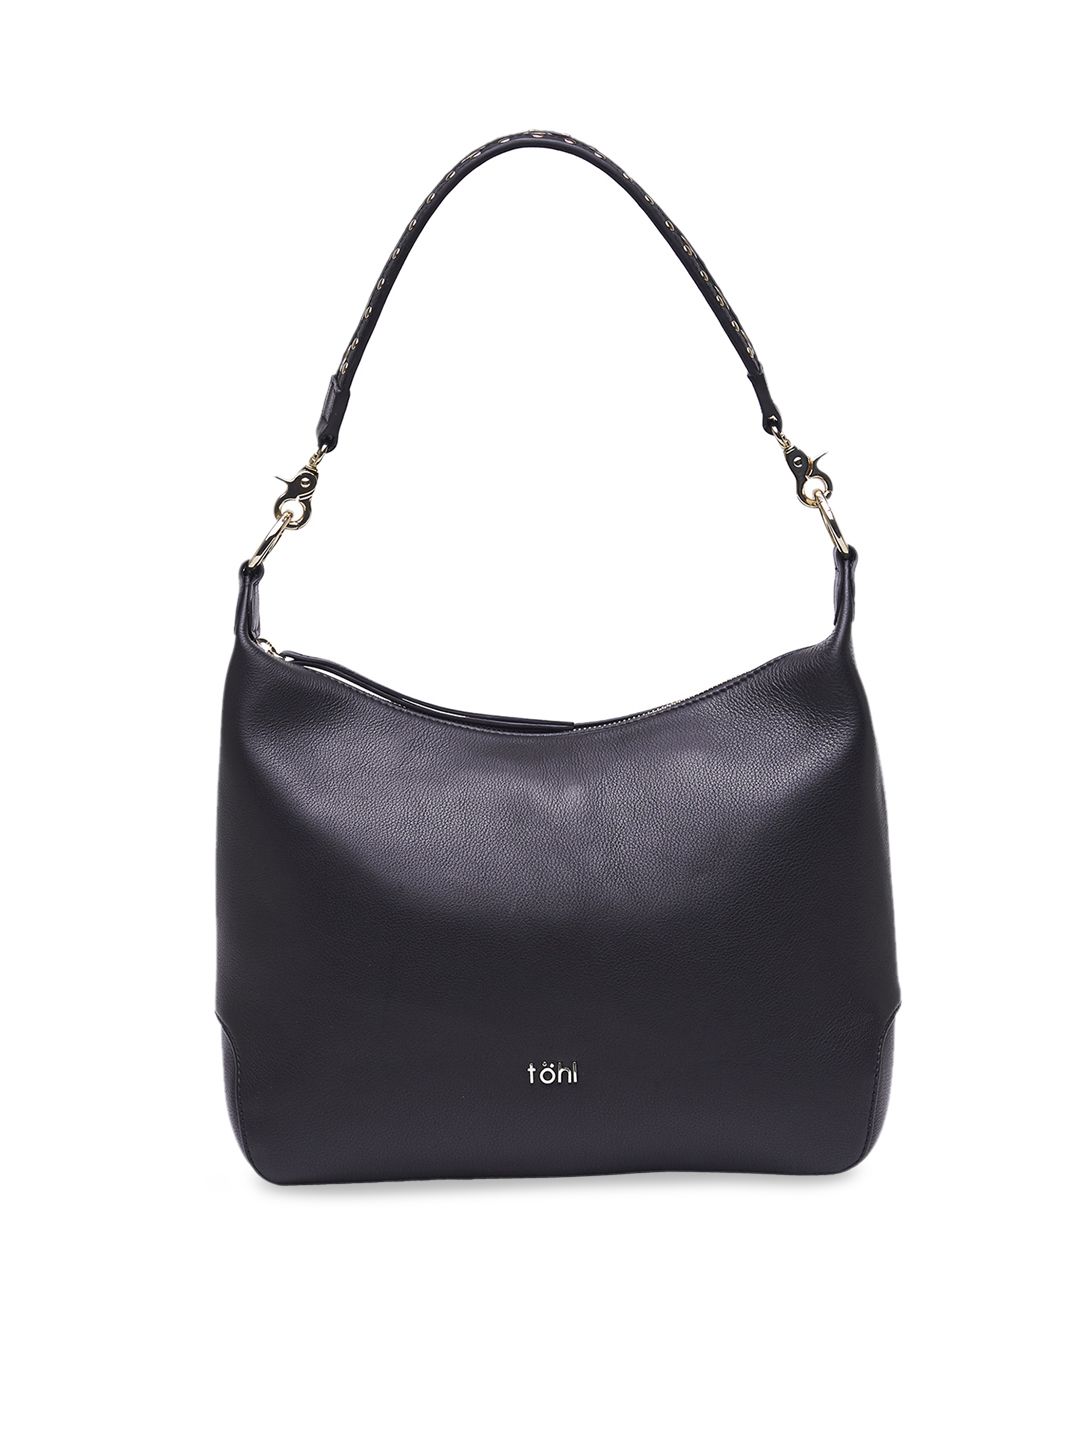 tohl Black Solid Leather Handheld Bag Price in India